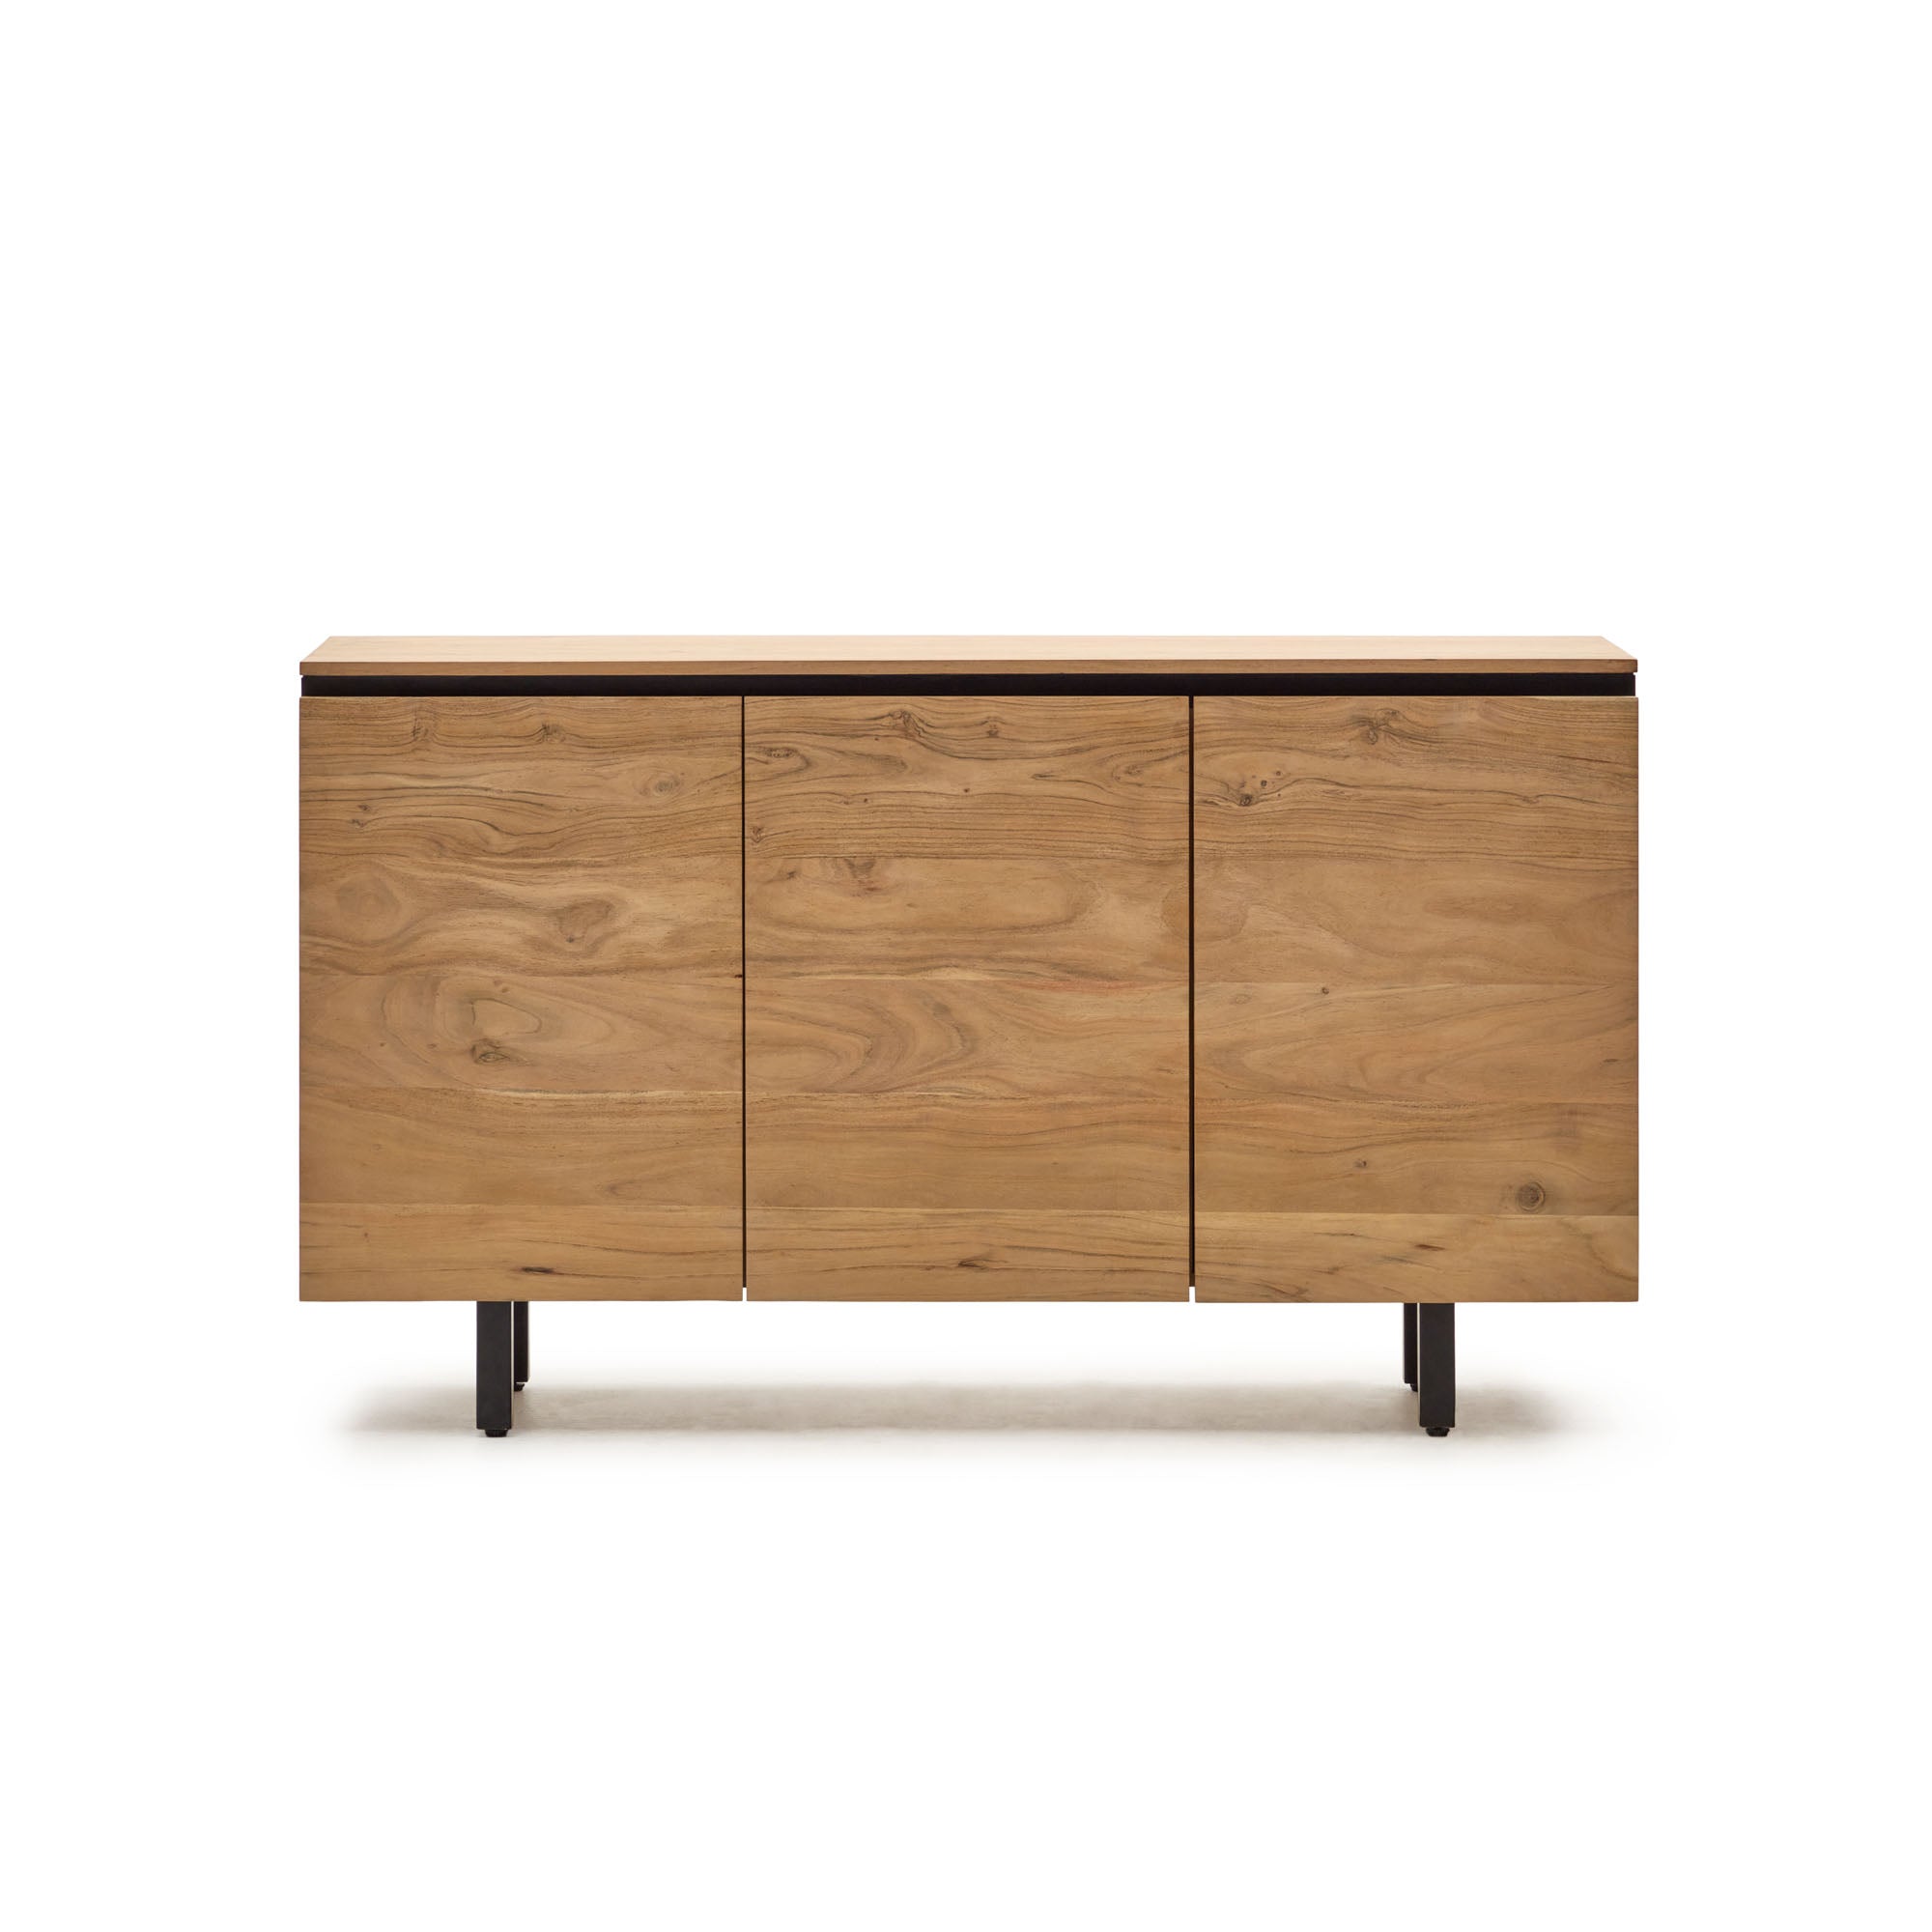 Uxue solid acacia wood sideboard in a natural finish, 150 x 88 cm